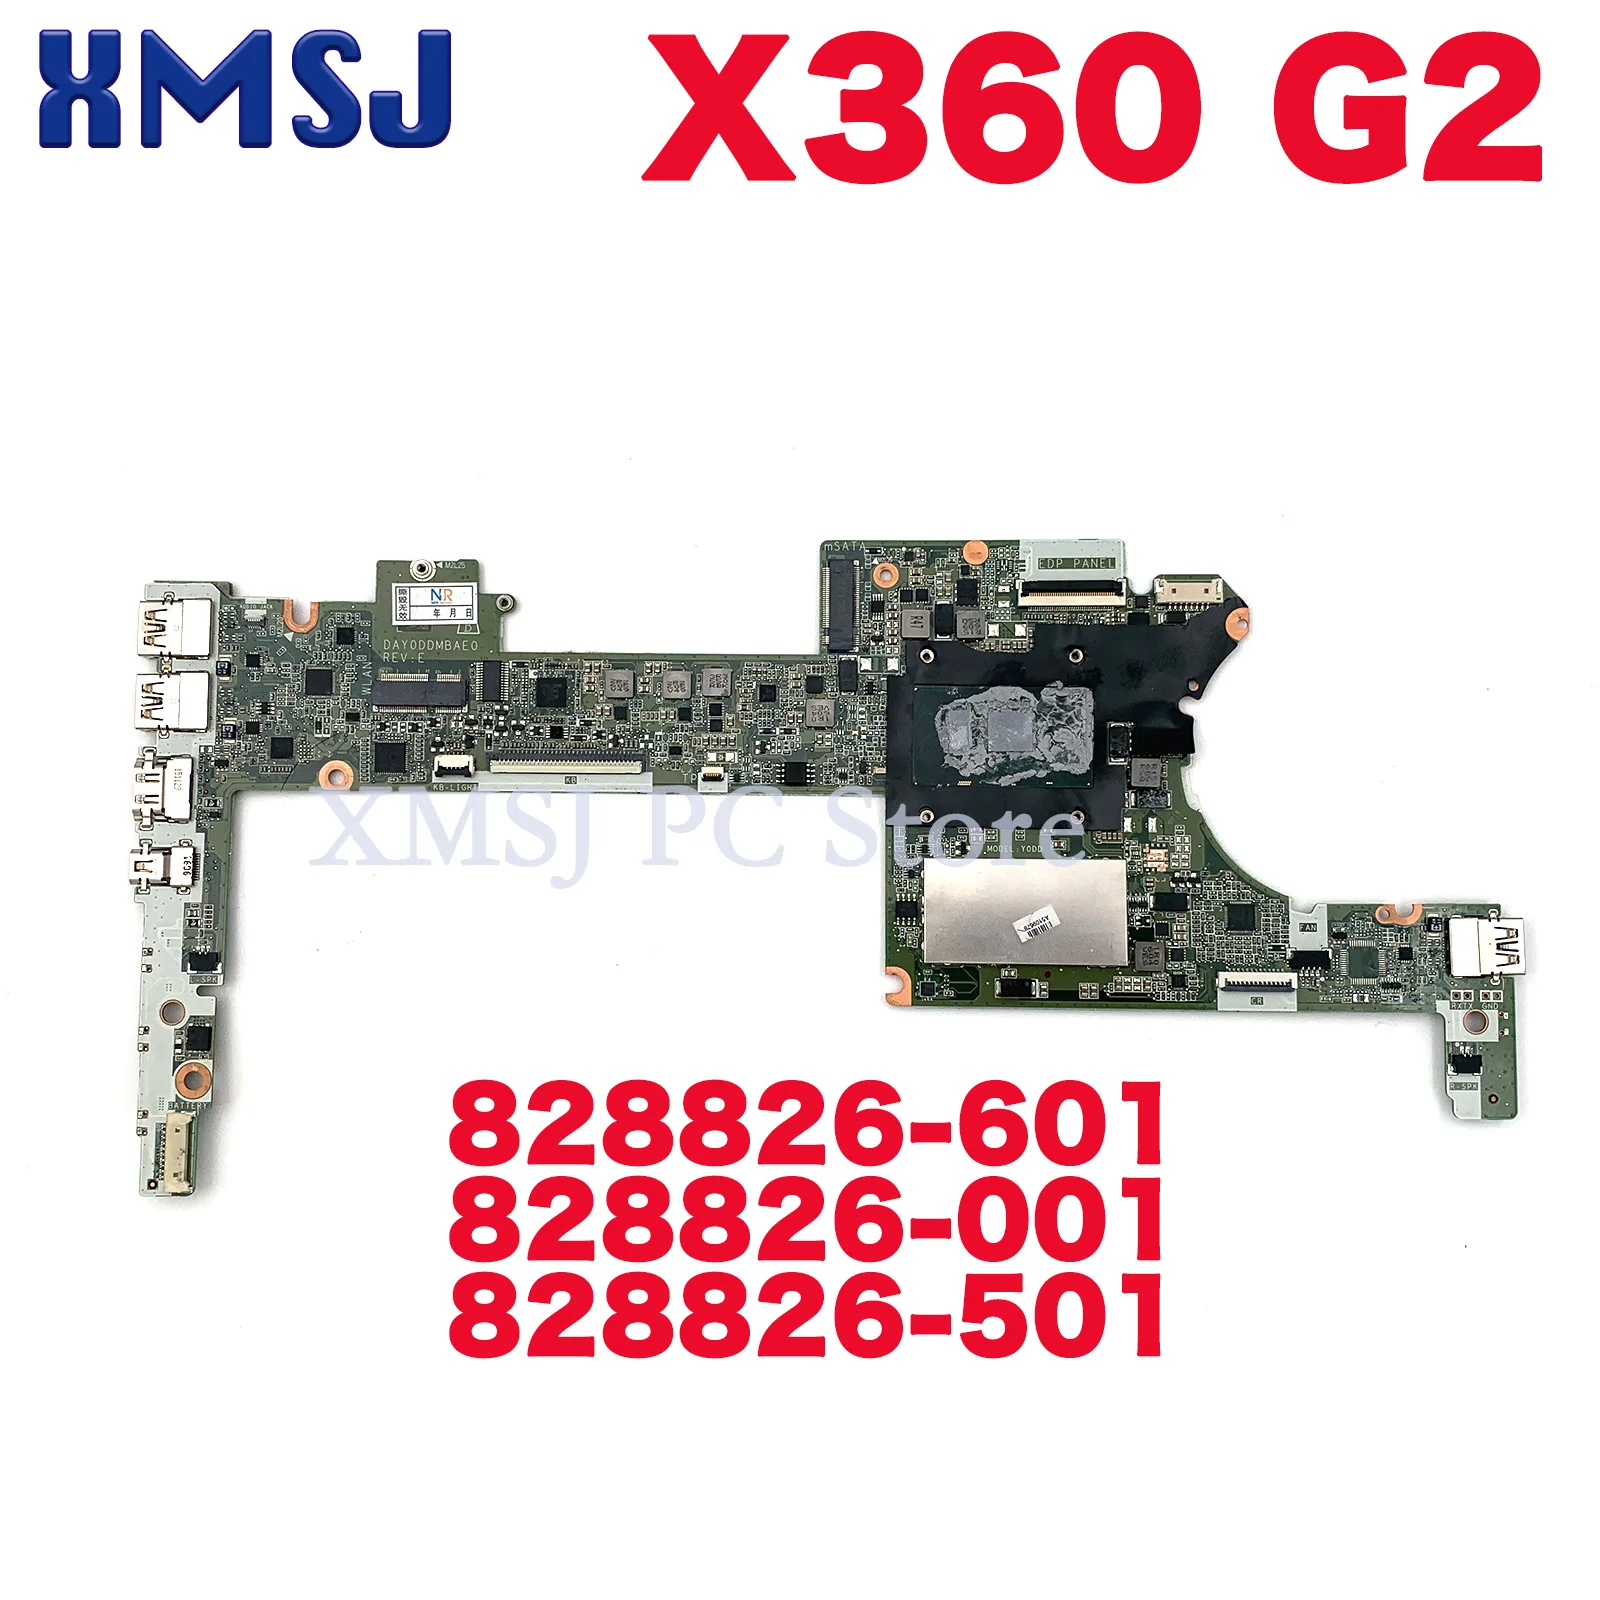 

For HP Spectre Pro X360 G2 Series Laptop Motherboard Mainboard I5 I7 6th Gen CPU 4GB 8GB RAM DAY0DDMBAE0 828826-601 828826-001